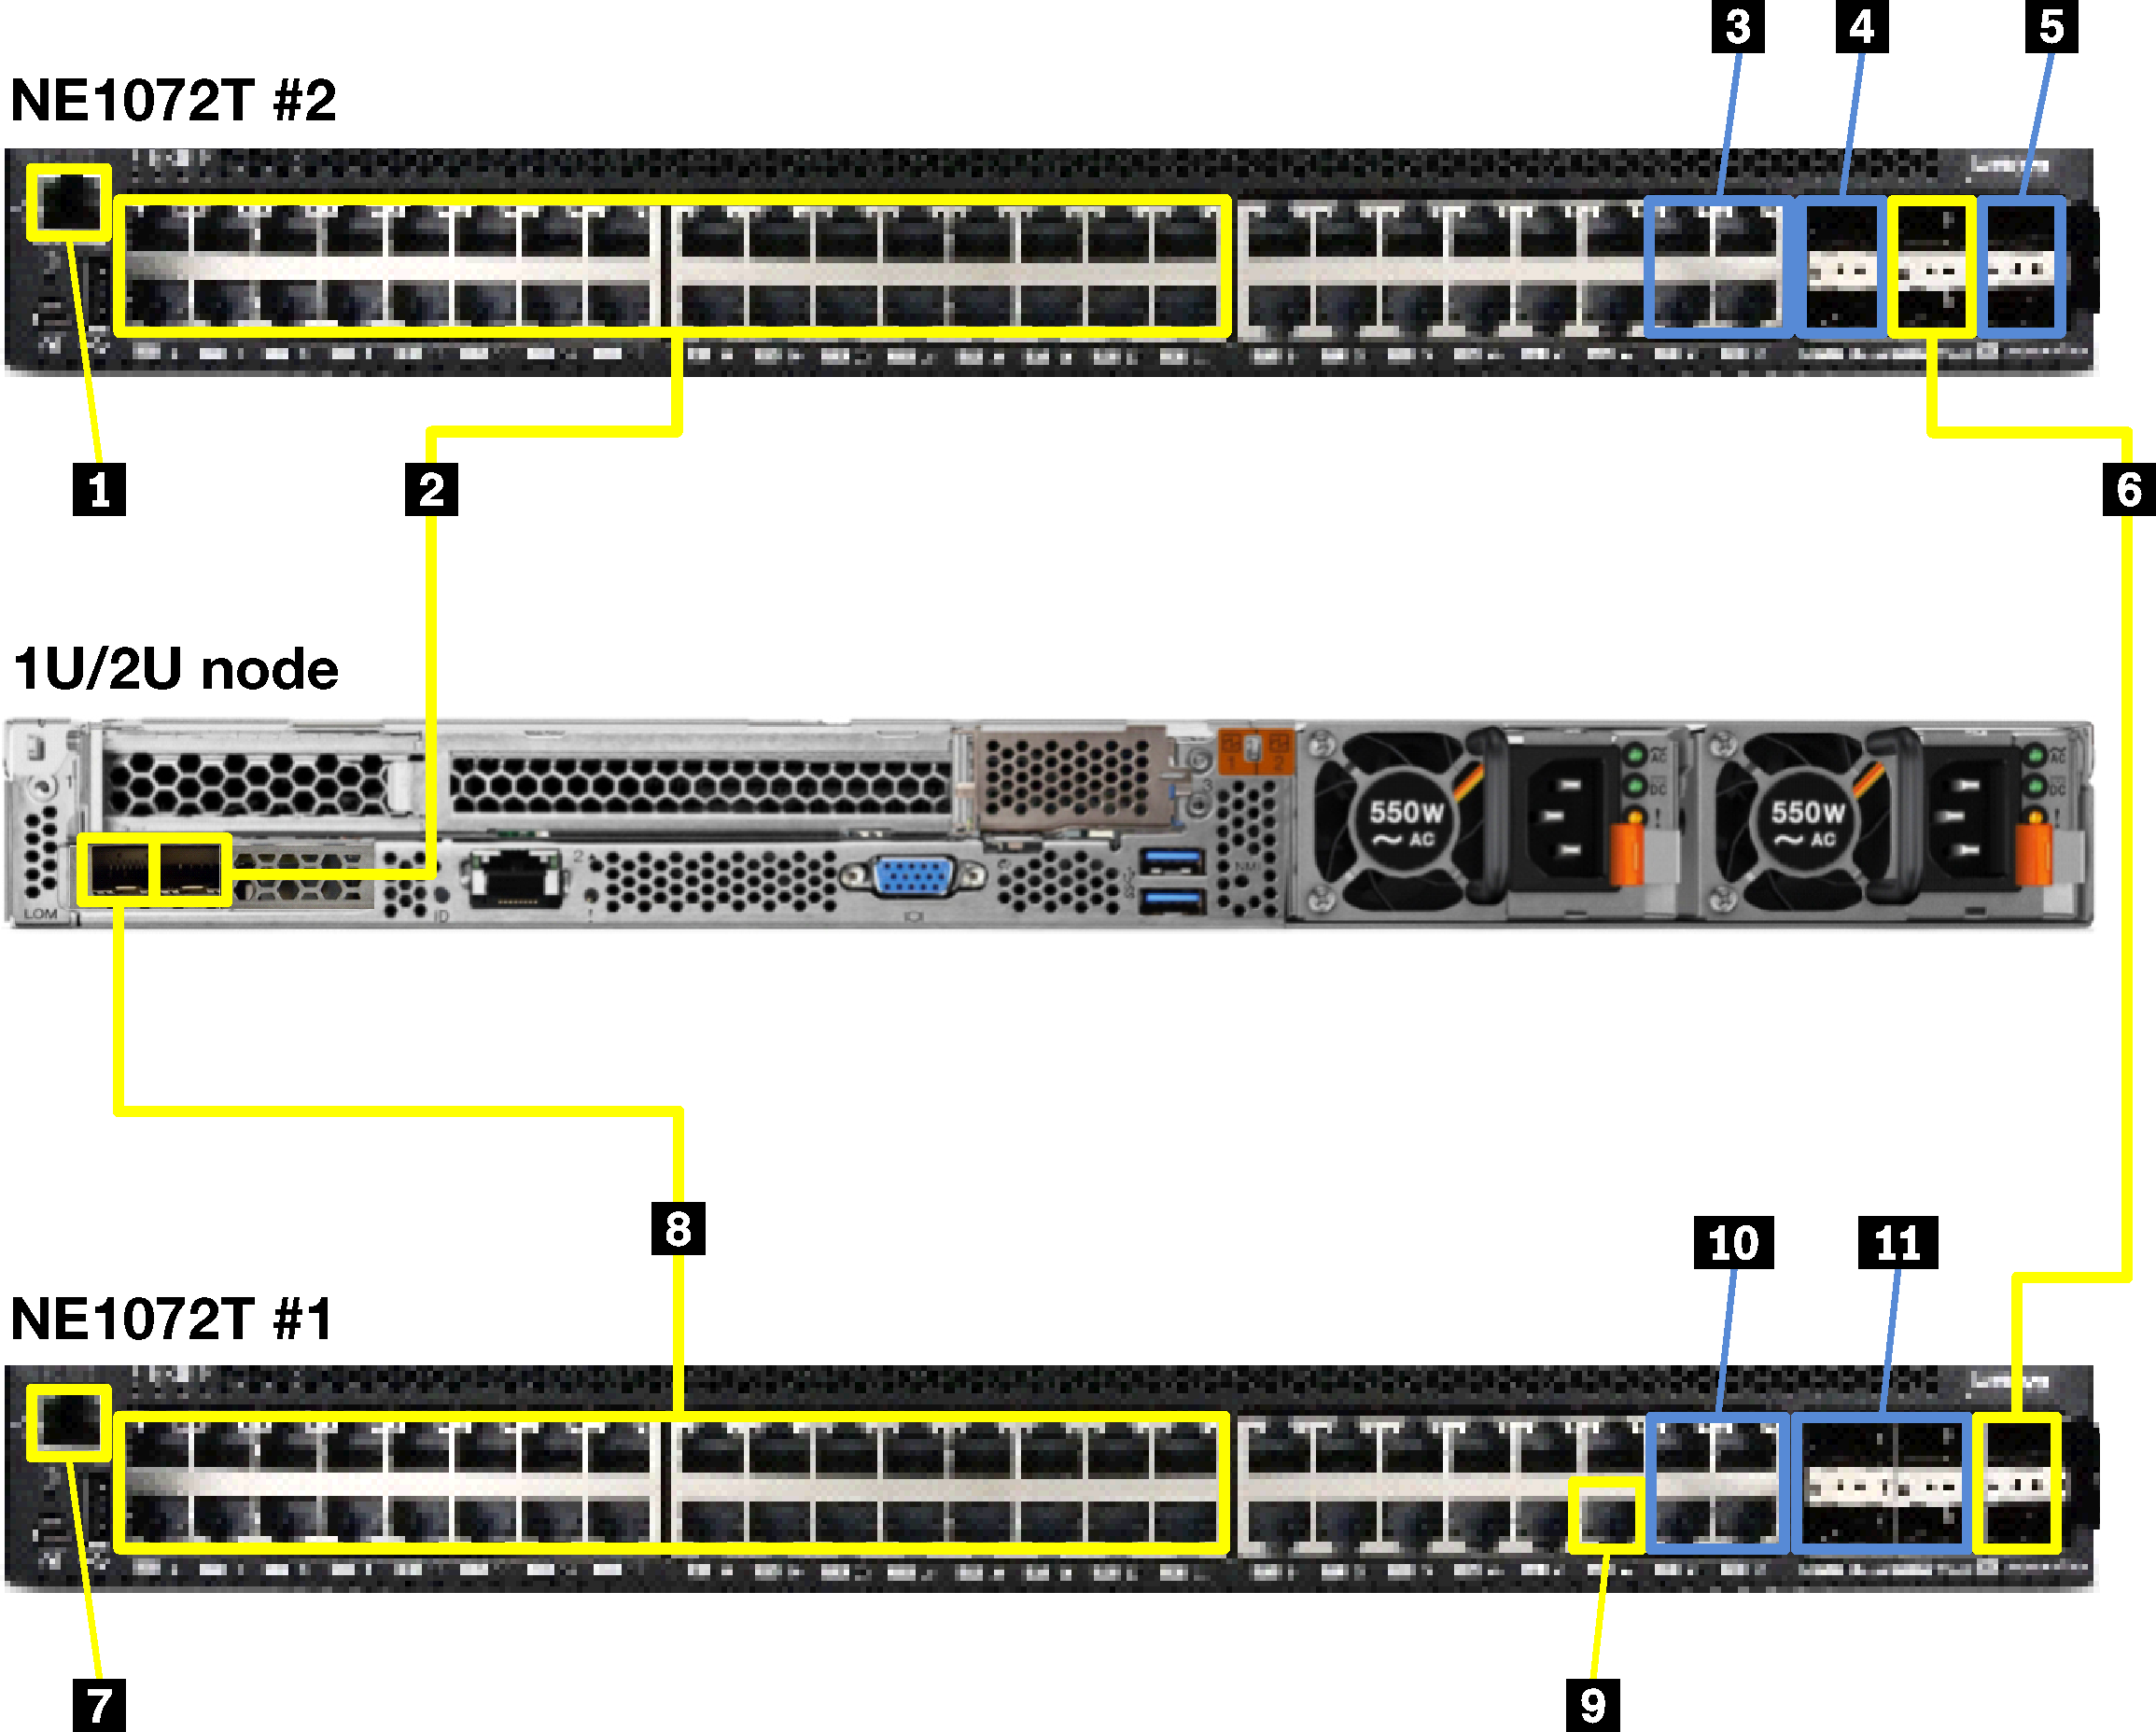 Graphic showing ThinkSystem NE1072T cabling for 1U and 2U appliances.